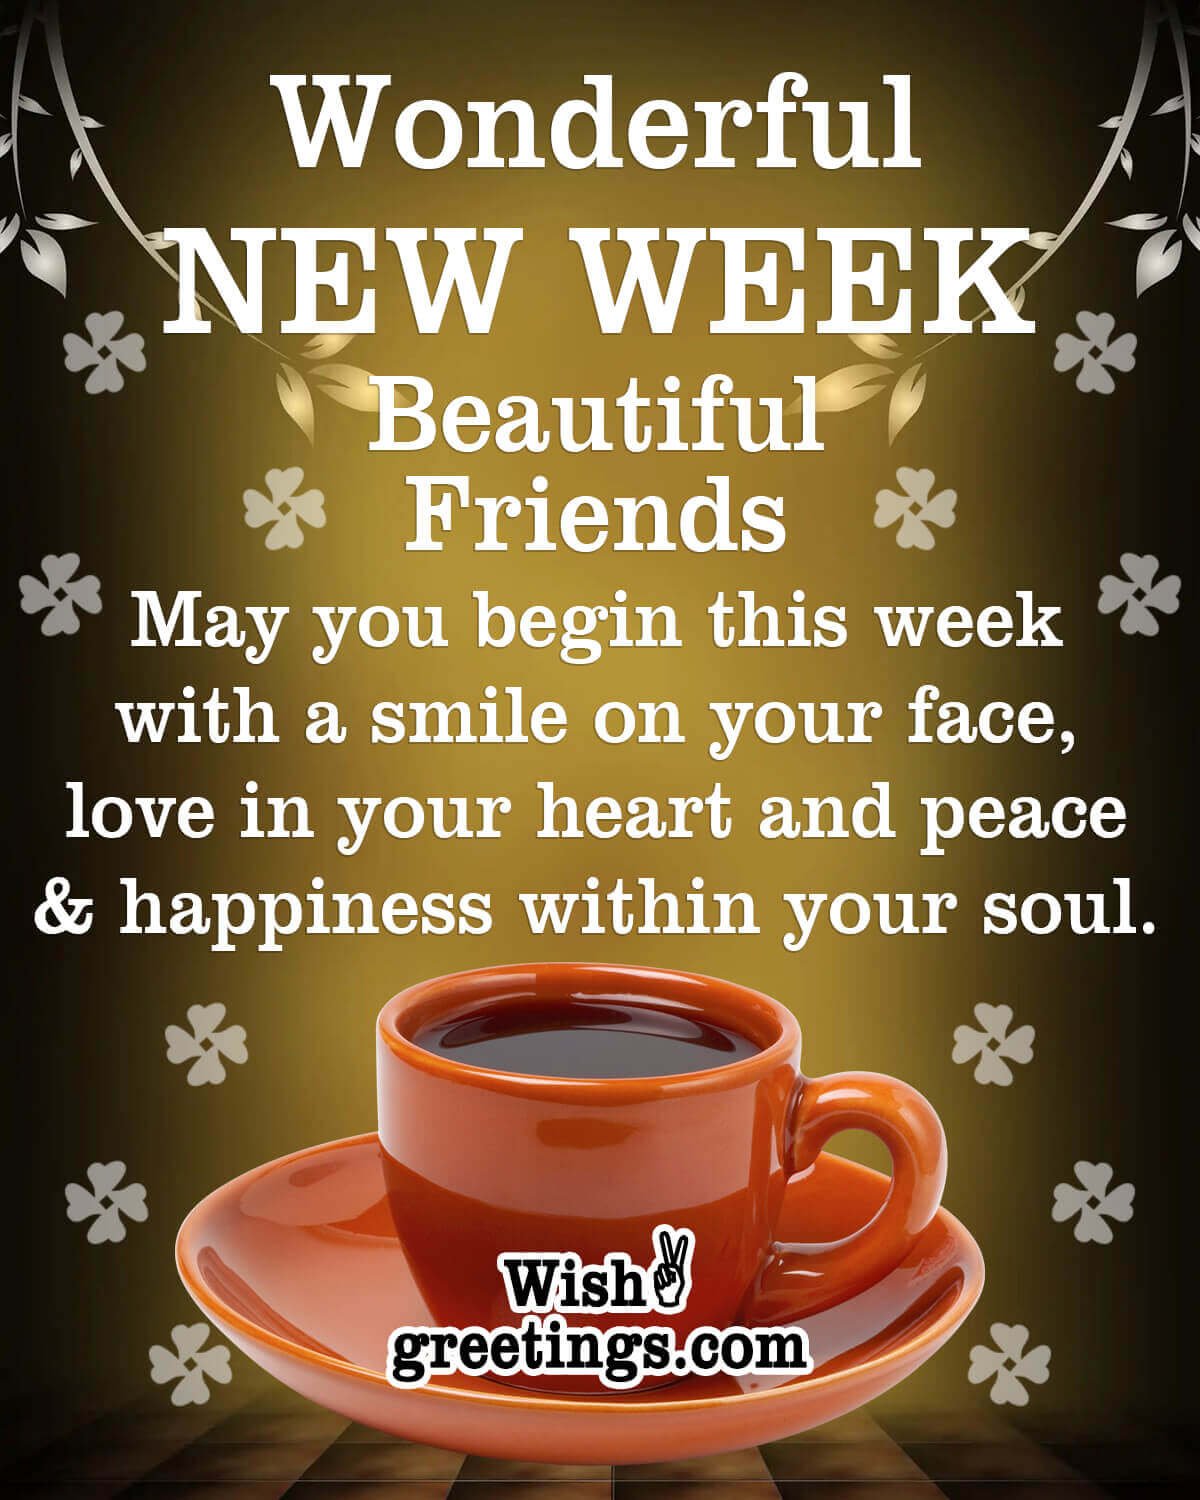 Wonderful New Week Message Image For Friends